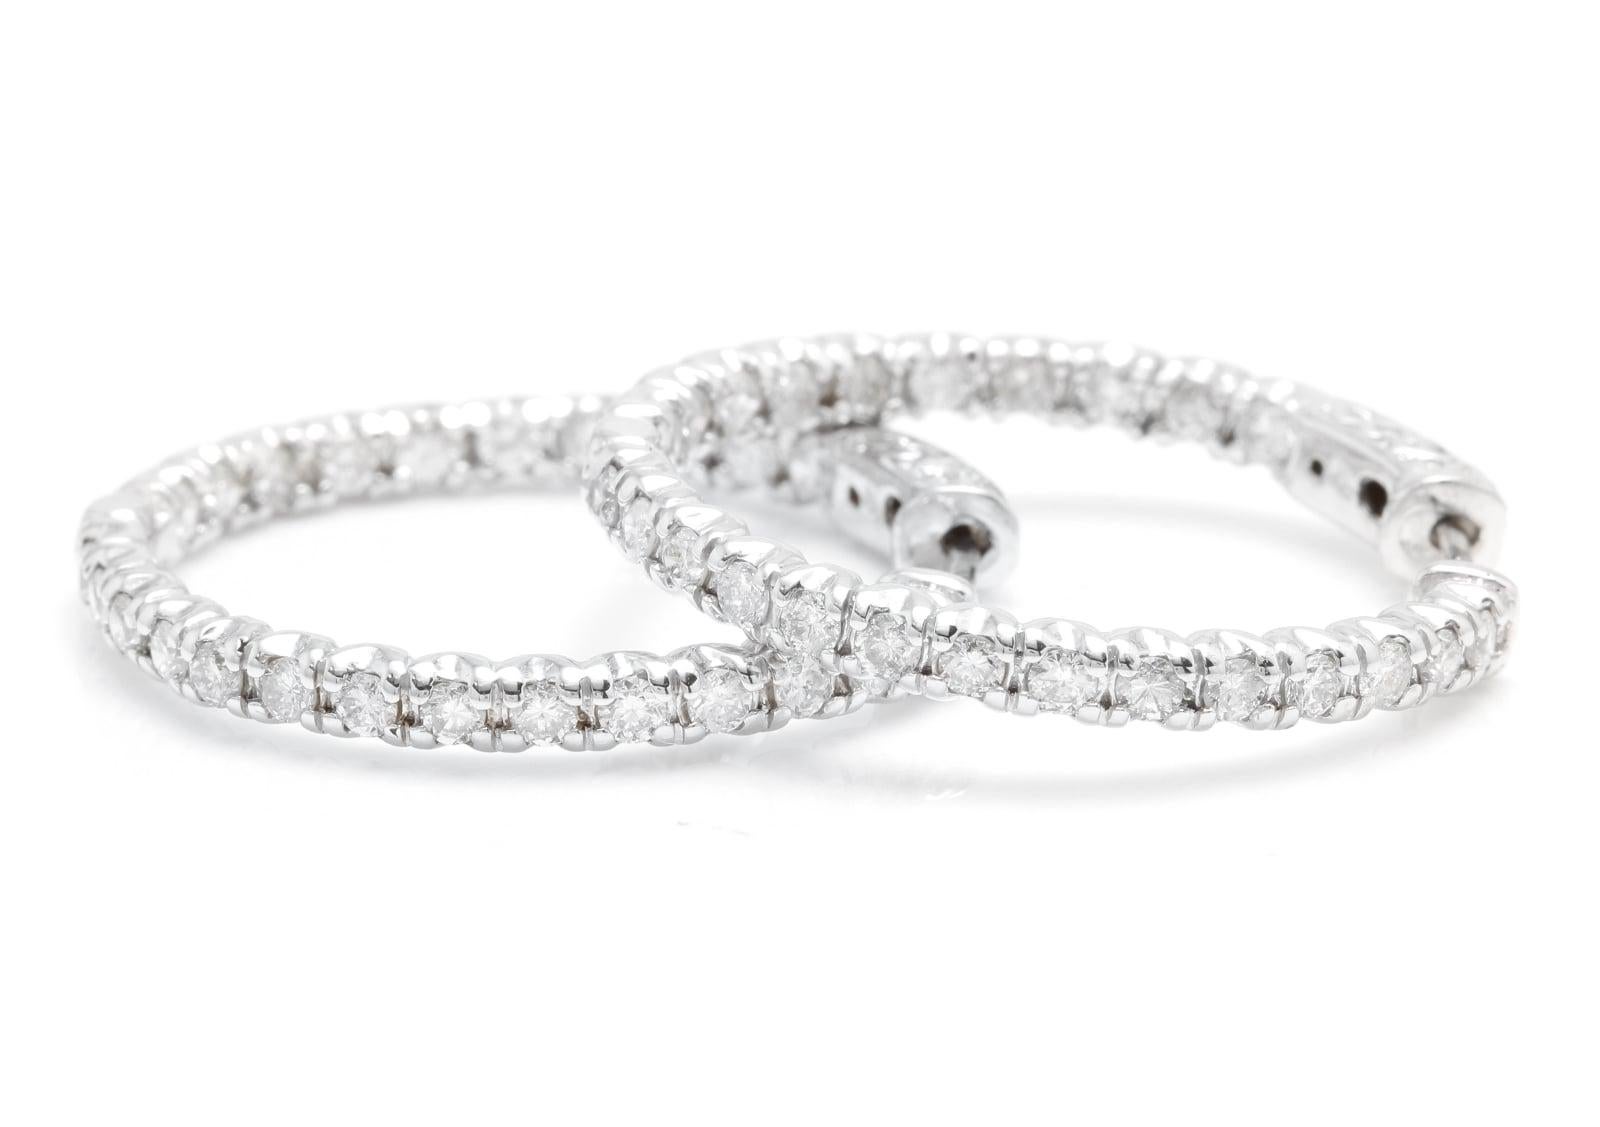 Exquisite 2.00 Carats Natural Diamond 14K Solid White Gold Hoop Earrings

Amazing looking piece!

Inside Out Diamonds.

Total Natural Round Cut White Diamonds Weight: Approx. 2.00 Carats (color G-H / Clarity SI1-SI2)

Earring Measures: 27mm

The